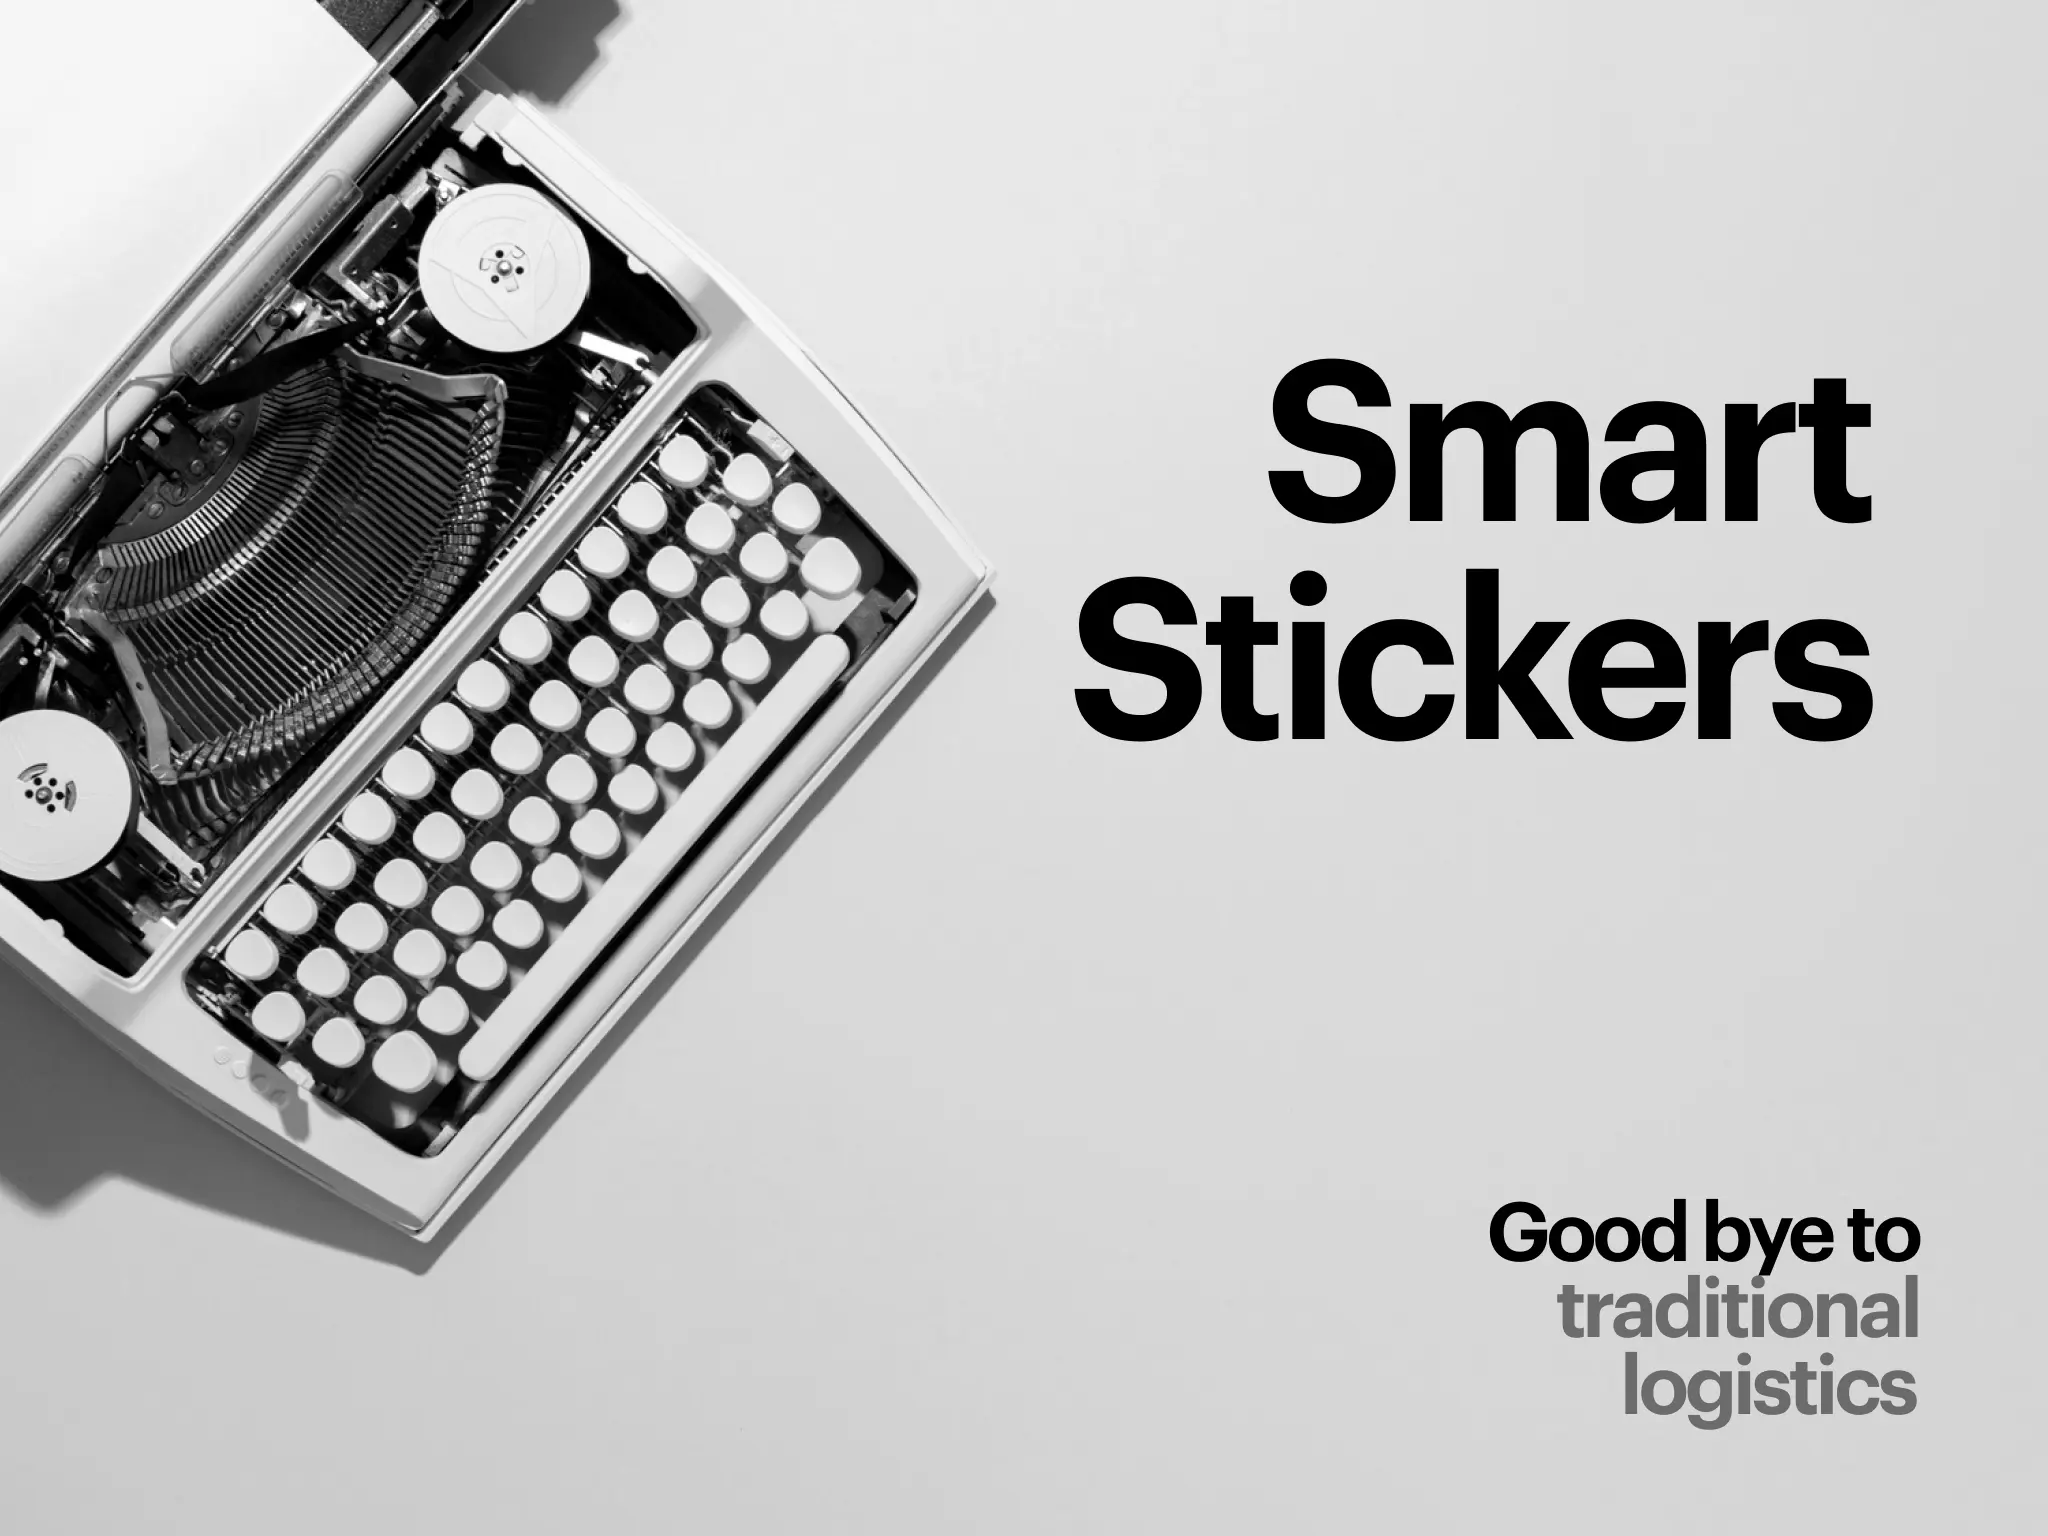 Smart stickers ux case study by agroudy